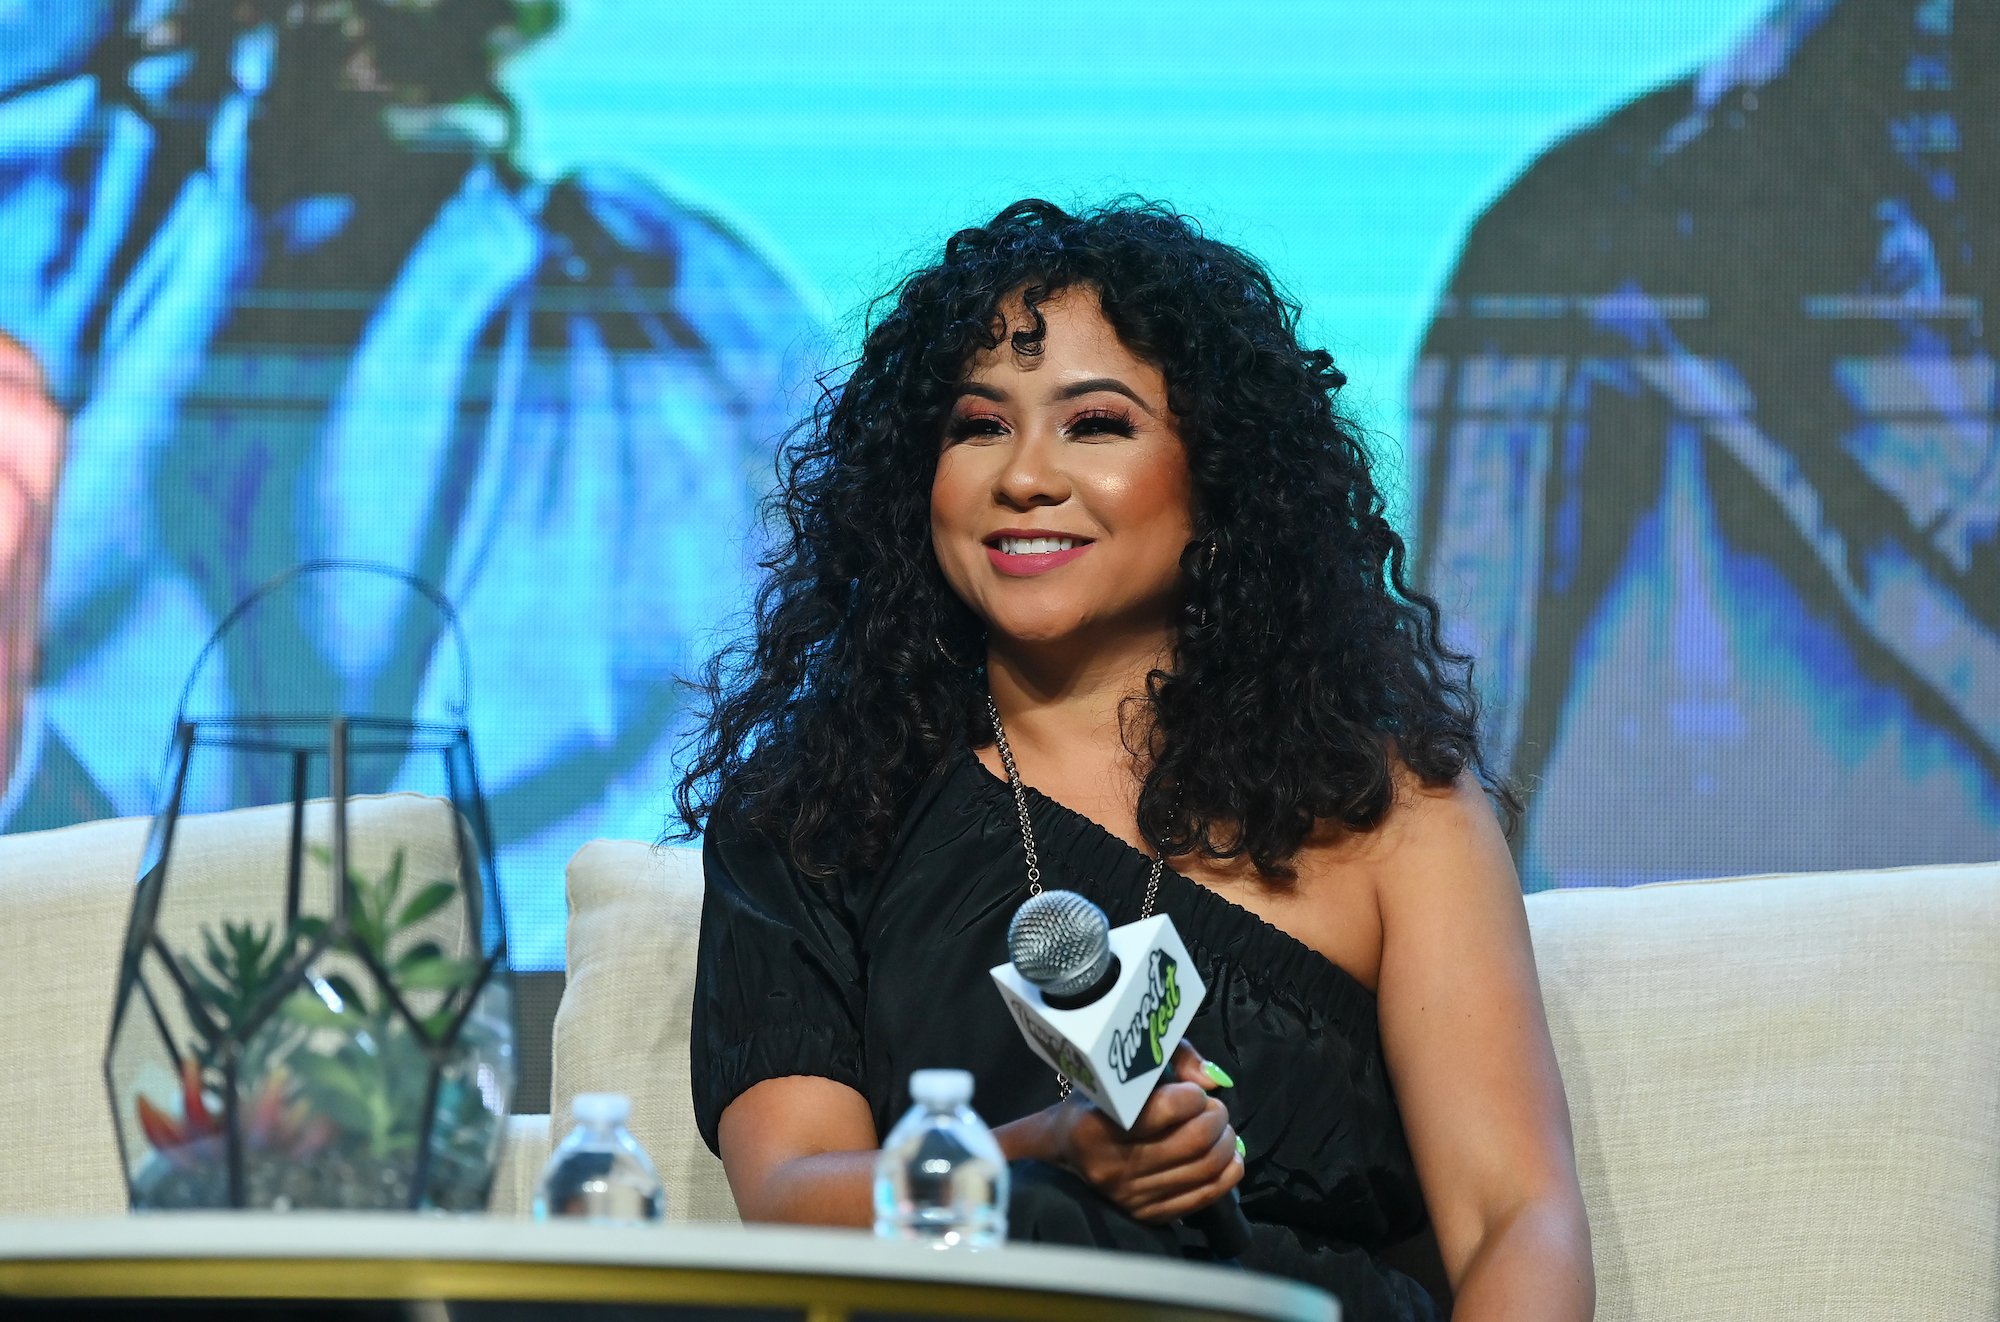 The Breakfast Club’ co-host Angela Yee smiling and holding a microphone while seated on stage.
